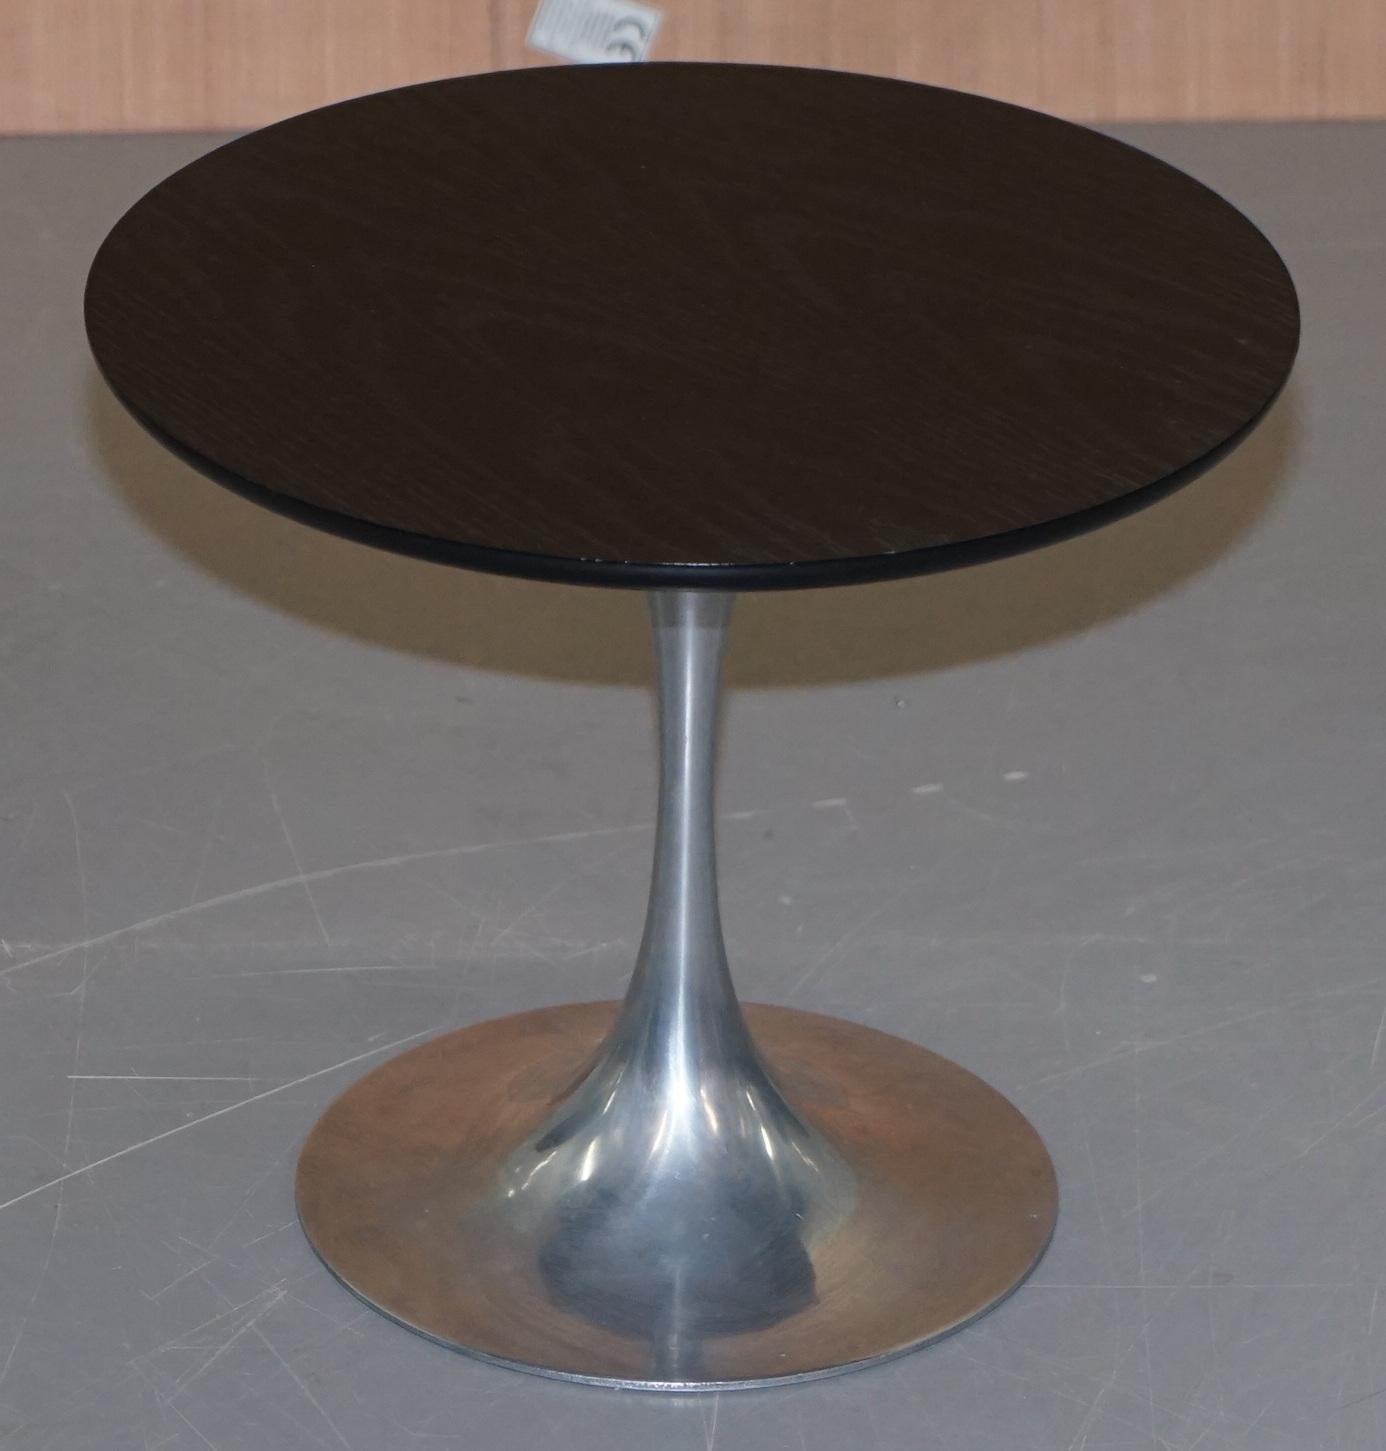 We are delighted to offer for sale this lovely pair of original 1960s A Arkana Tulip side tables with ebonised tops and chrome bases

Both tables are stamped inside A Arkana although one stamp is partially missing. The tops are ebonised ash wood